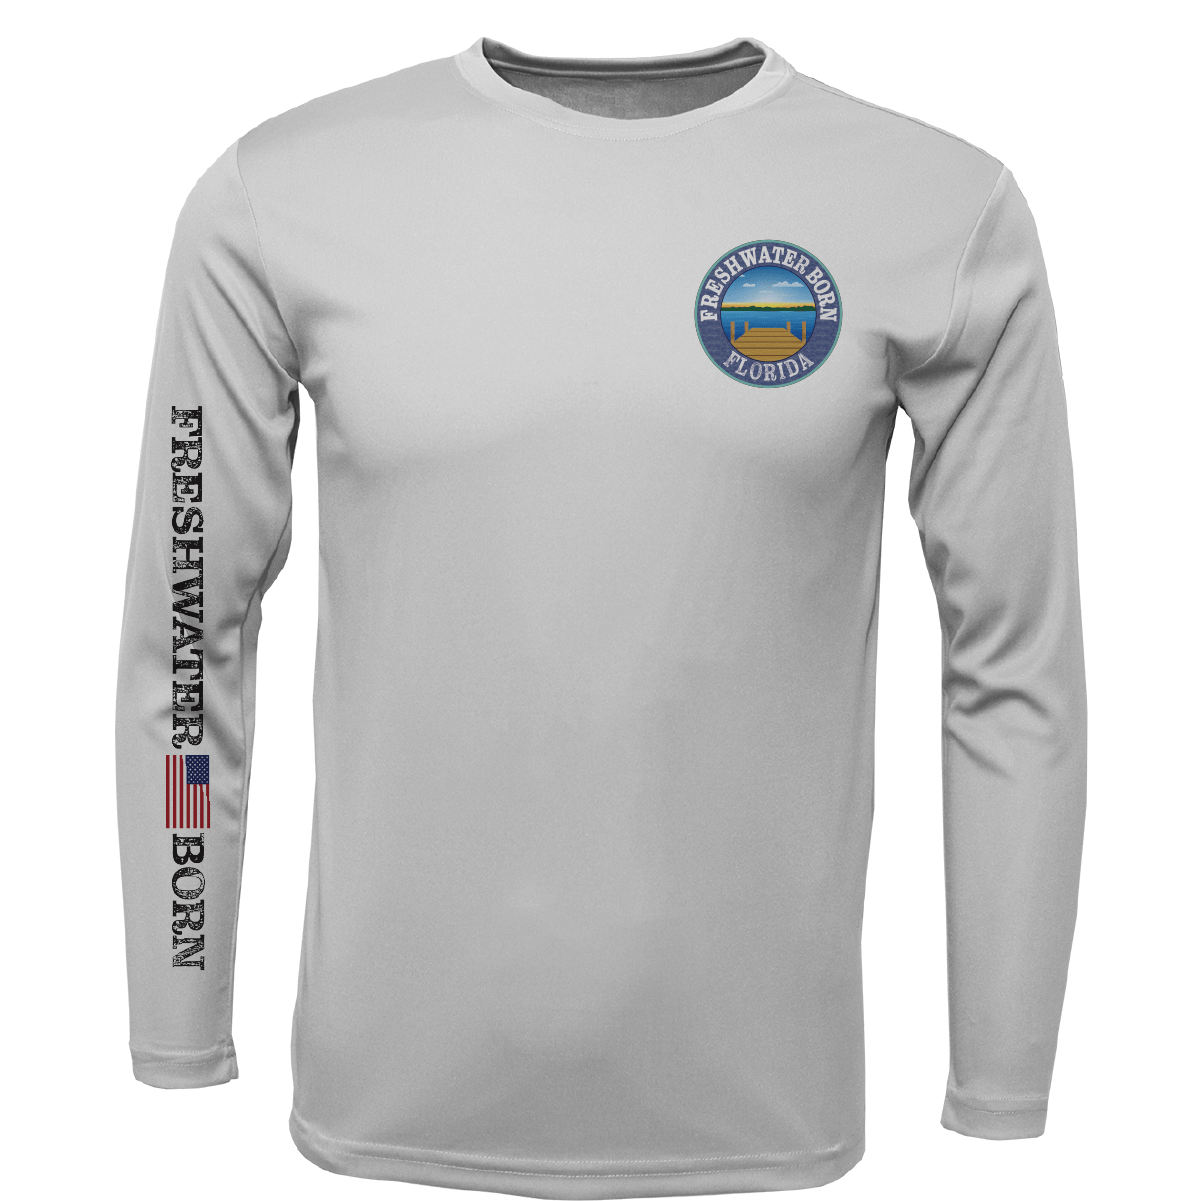 Florida Freshwater Born Surrender The Booty Boy's Long Sleeve UPF 50 -  Russell's Western Wear, Inc.